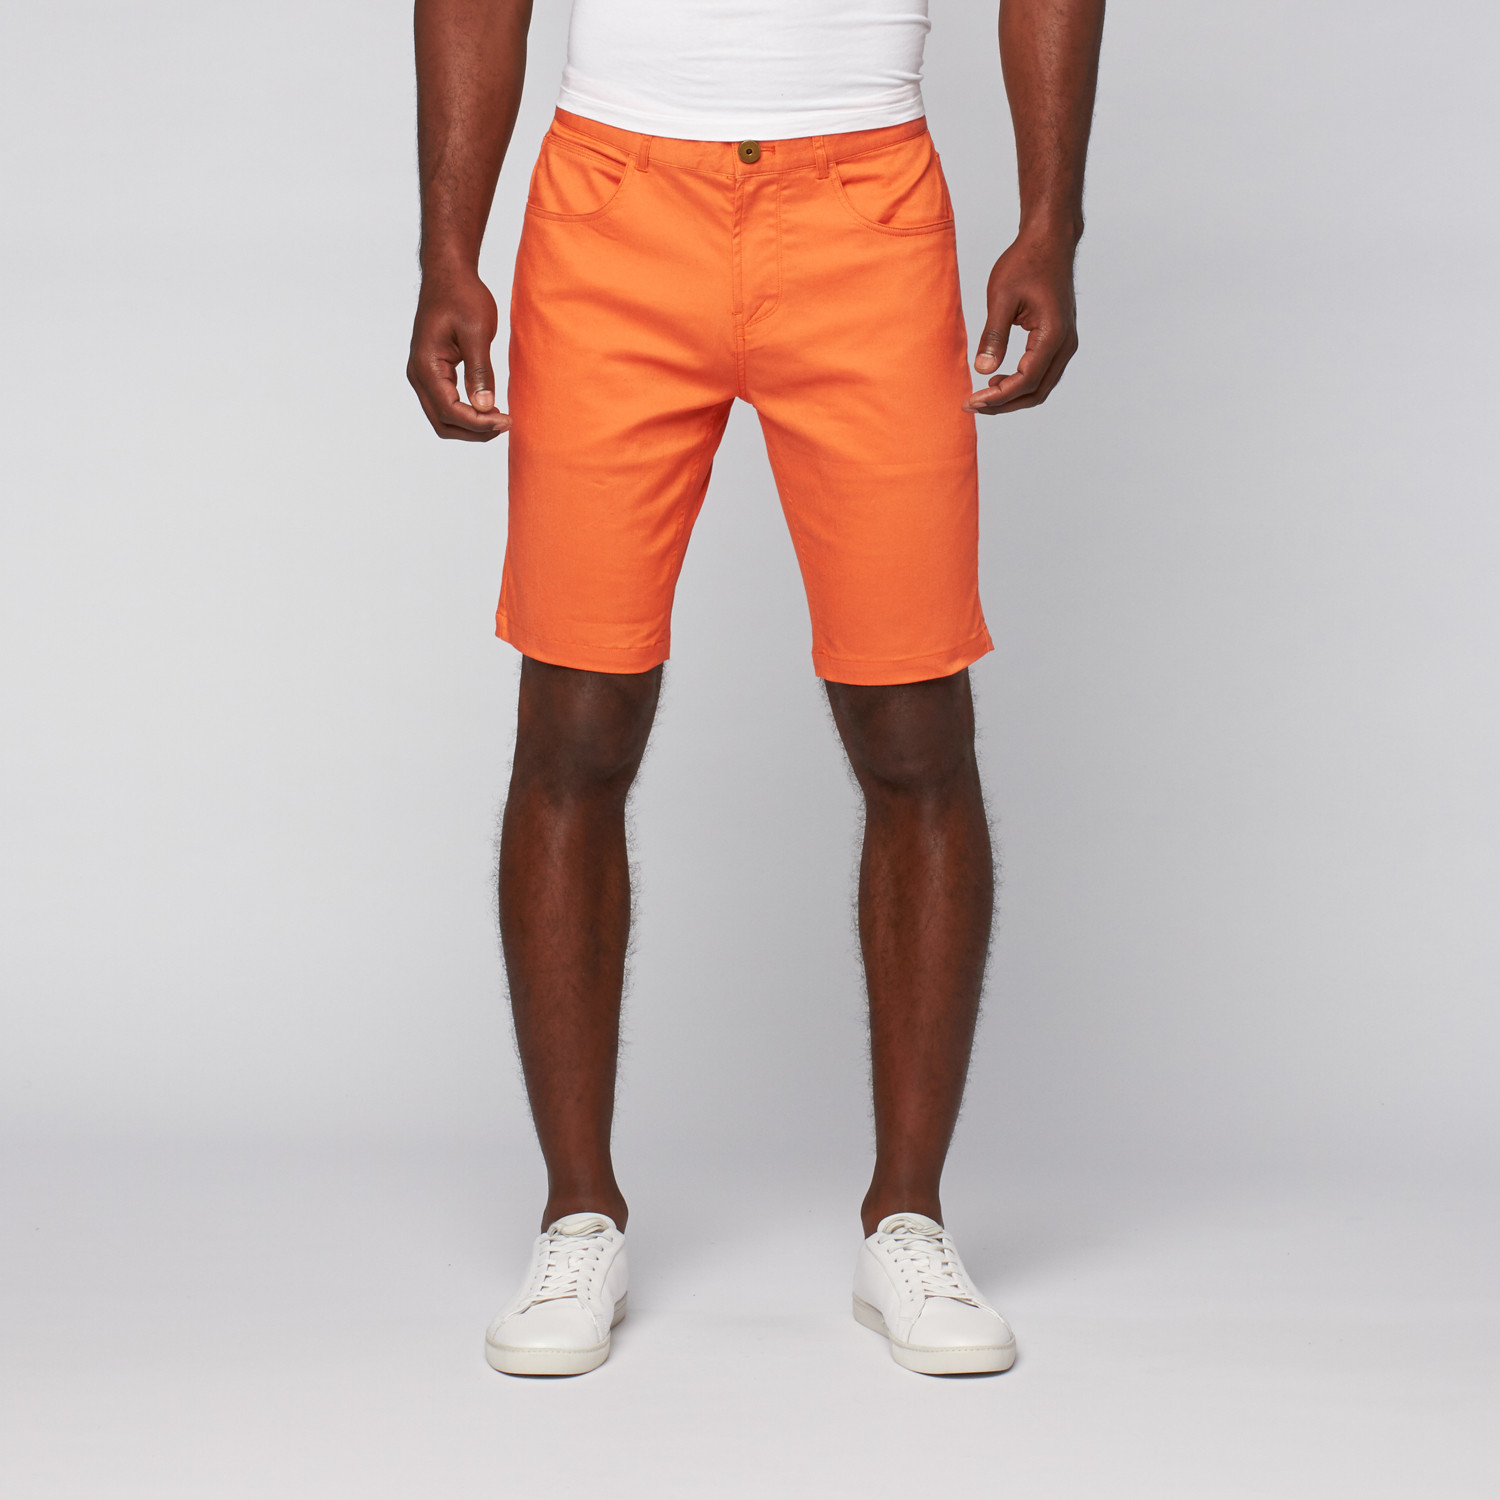 Jeans Shorts // Orange (29WX32L) - Postmarc - Touch of Modern